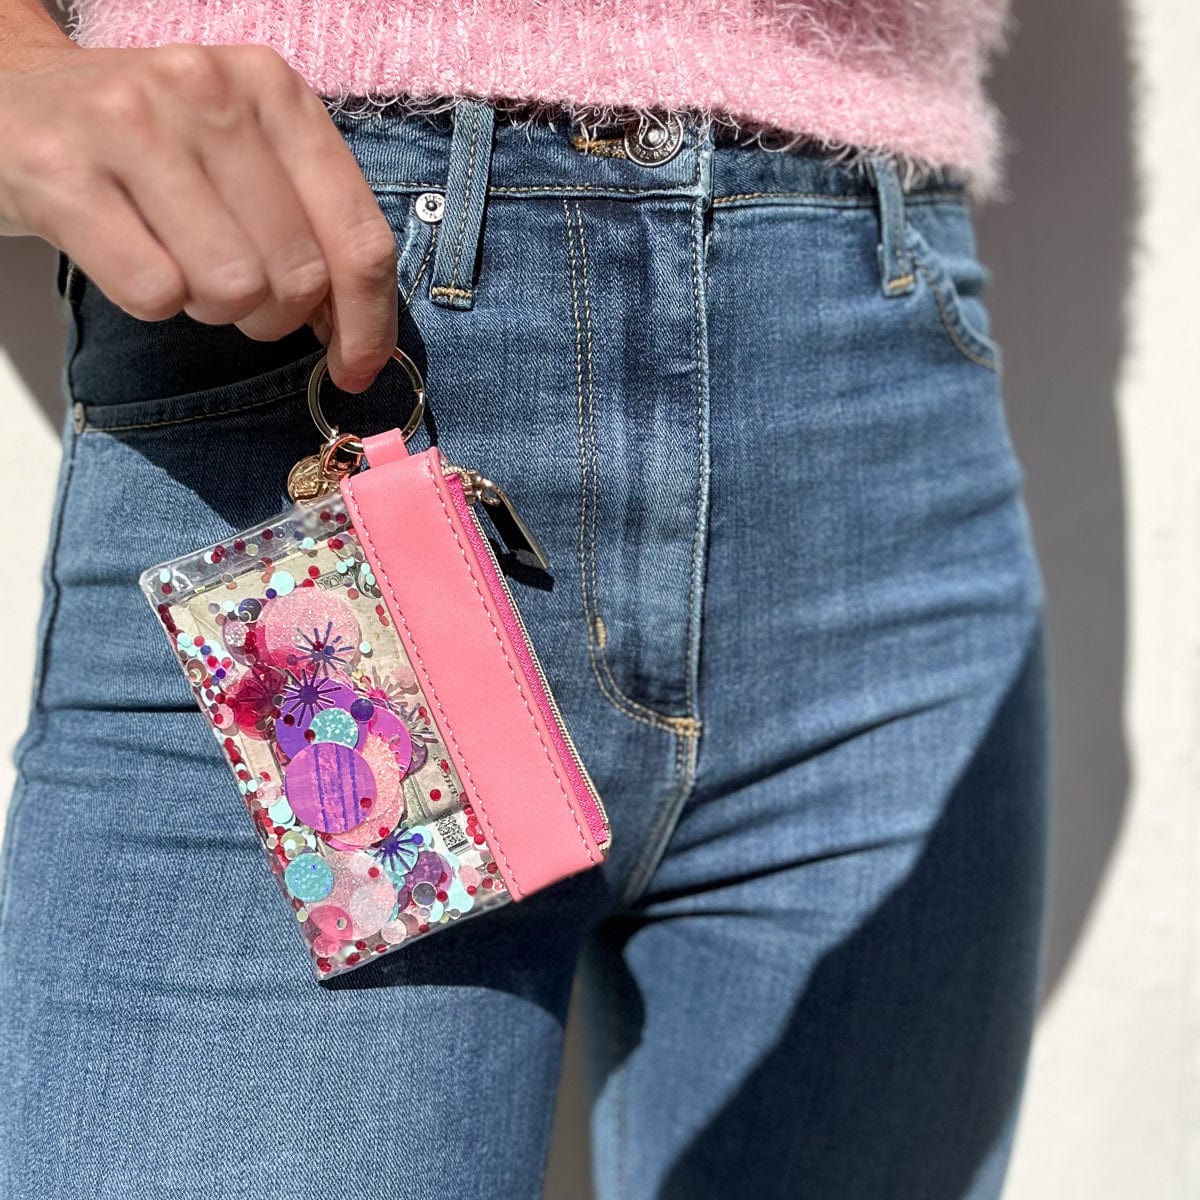 Shop Packed Party Think Pink Confetti Keychain Wallet - Premium Clutch Bag from Packed Party Online now at Spoiled Brat 